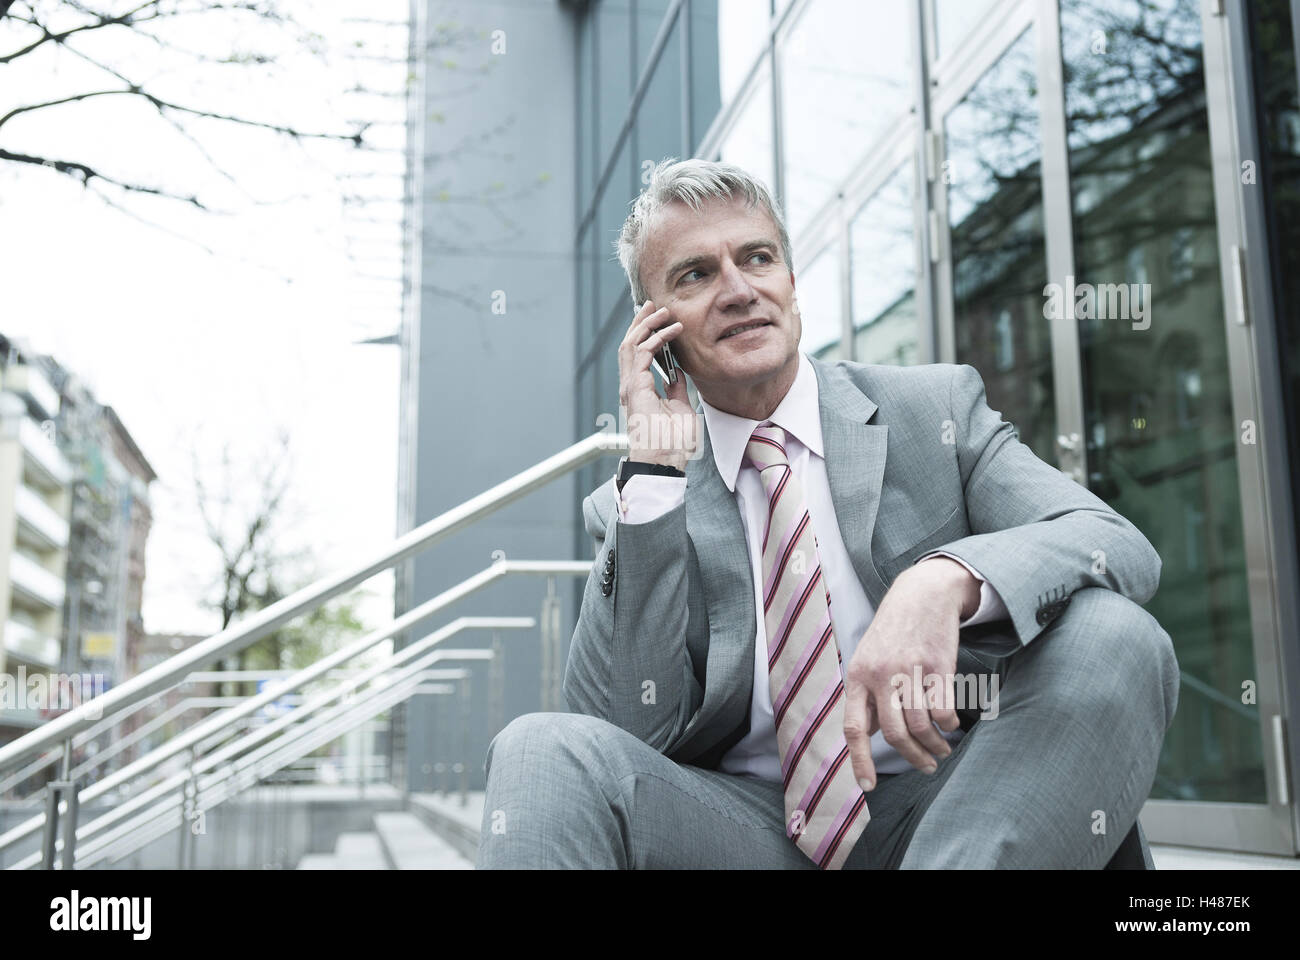 Managers, call up, tie, man, Bestager, business, concentration, mobile phone, sit, conversation, telephone call, tie, Stock Photo